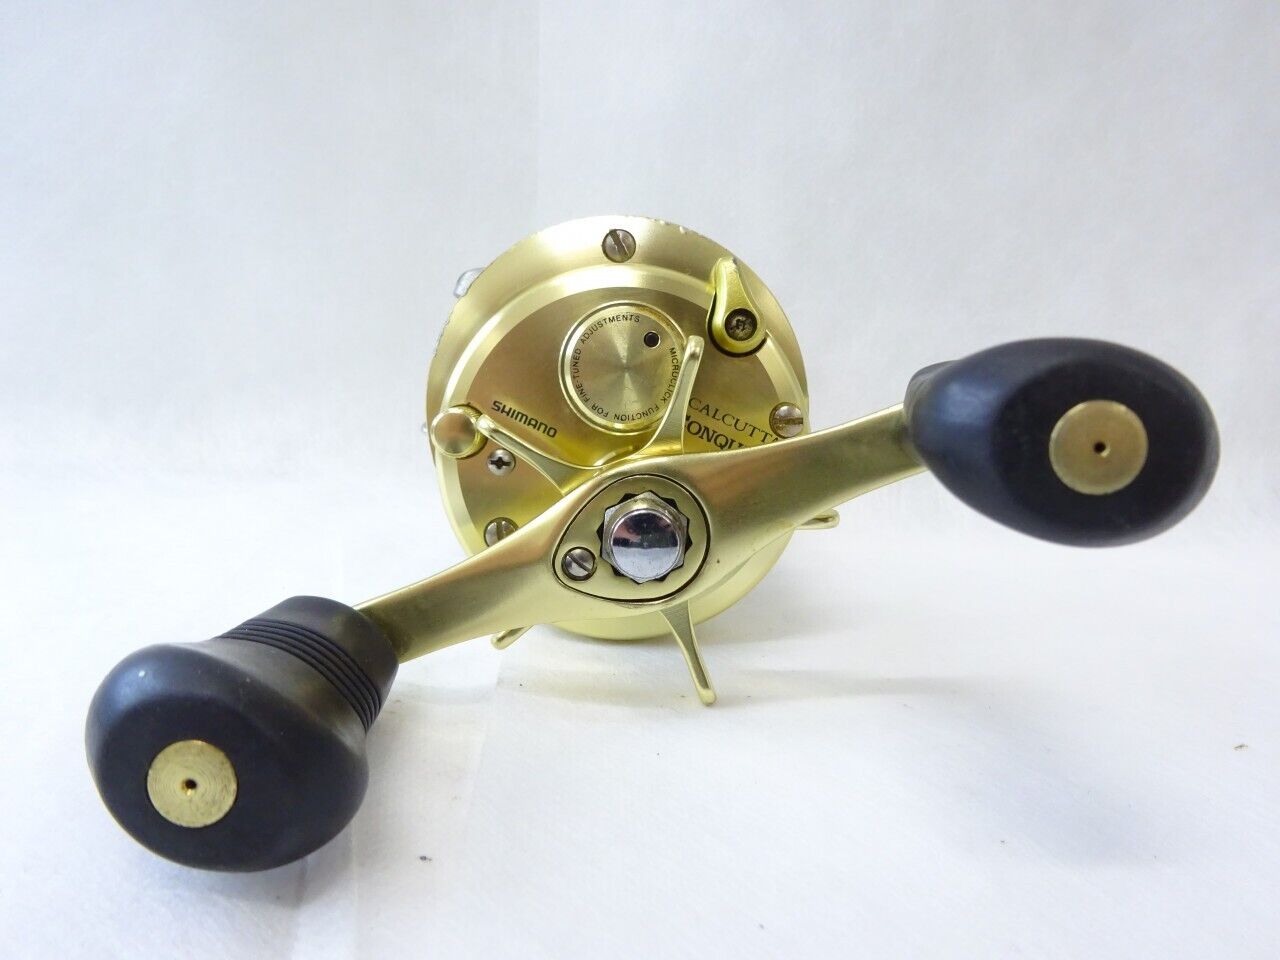 Shimano 01 CALCUTTA CONQUEST 400 Right Handle Bait Casting Reel F/S from Japan